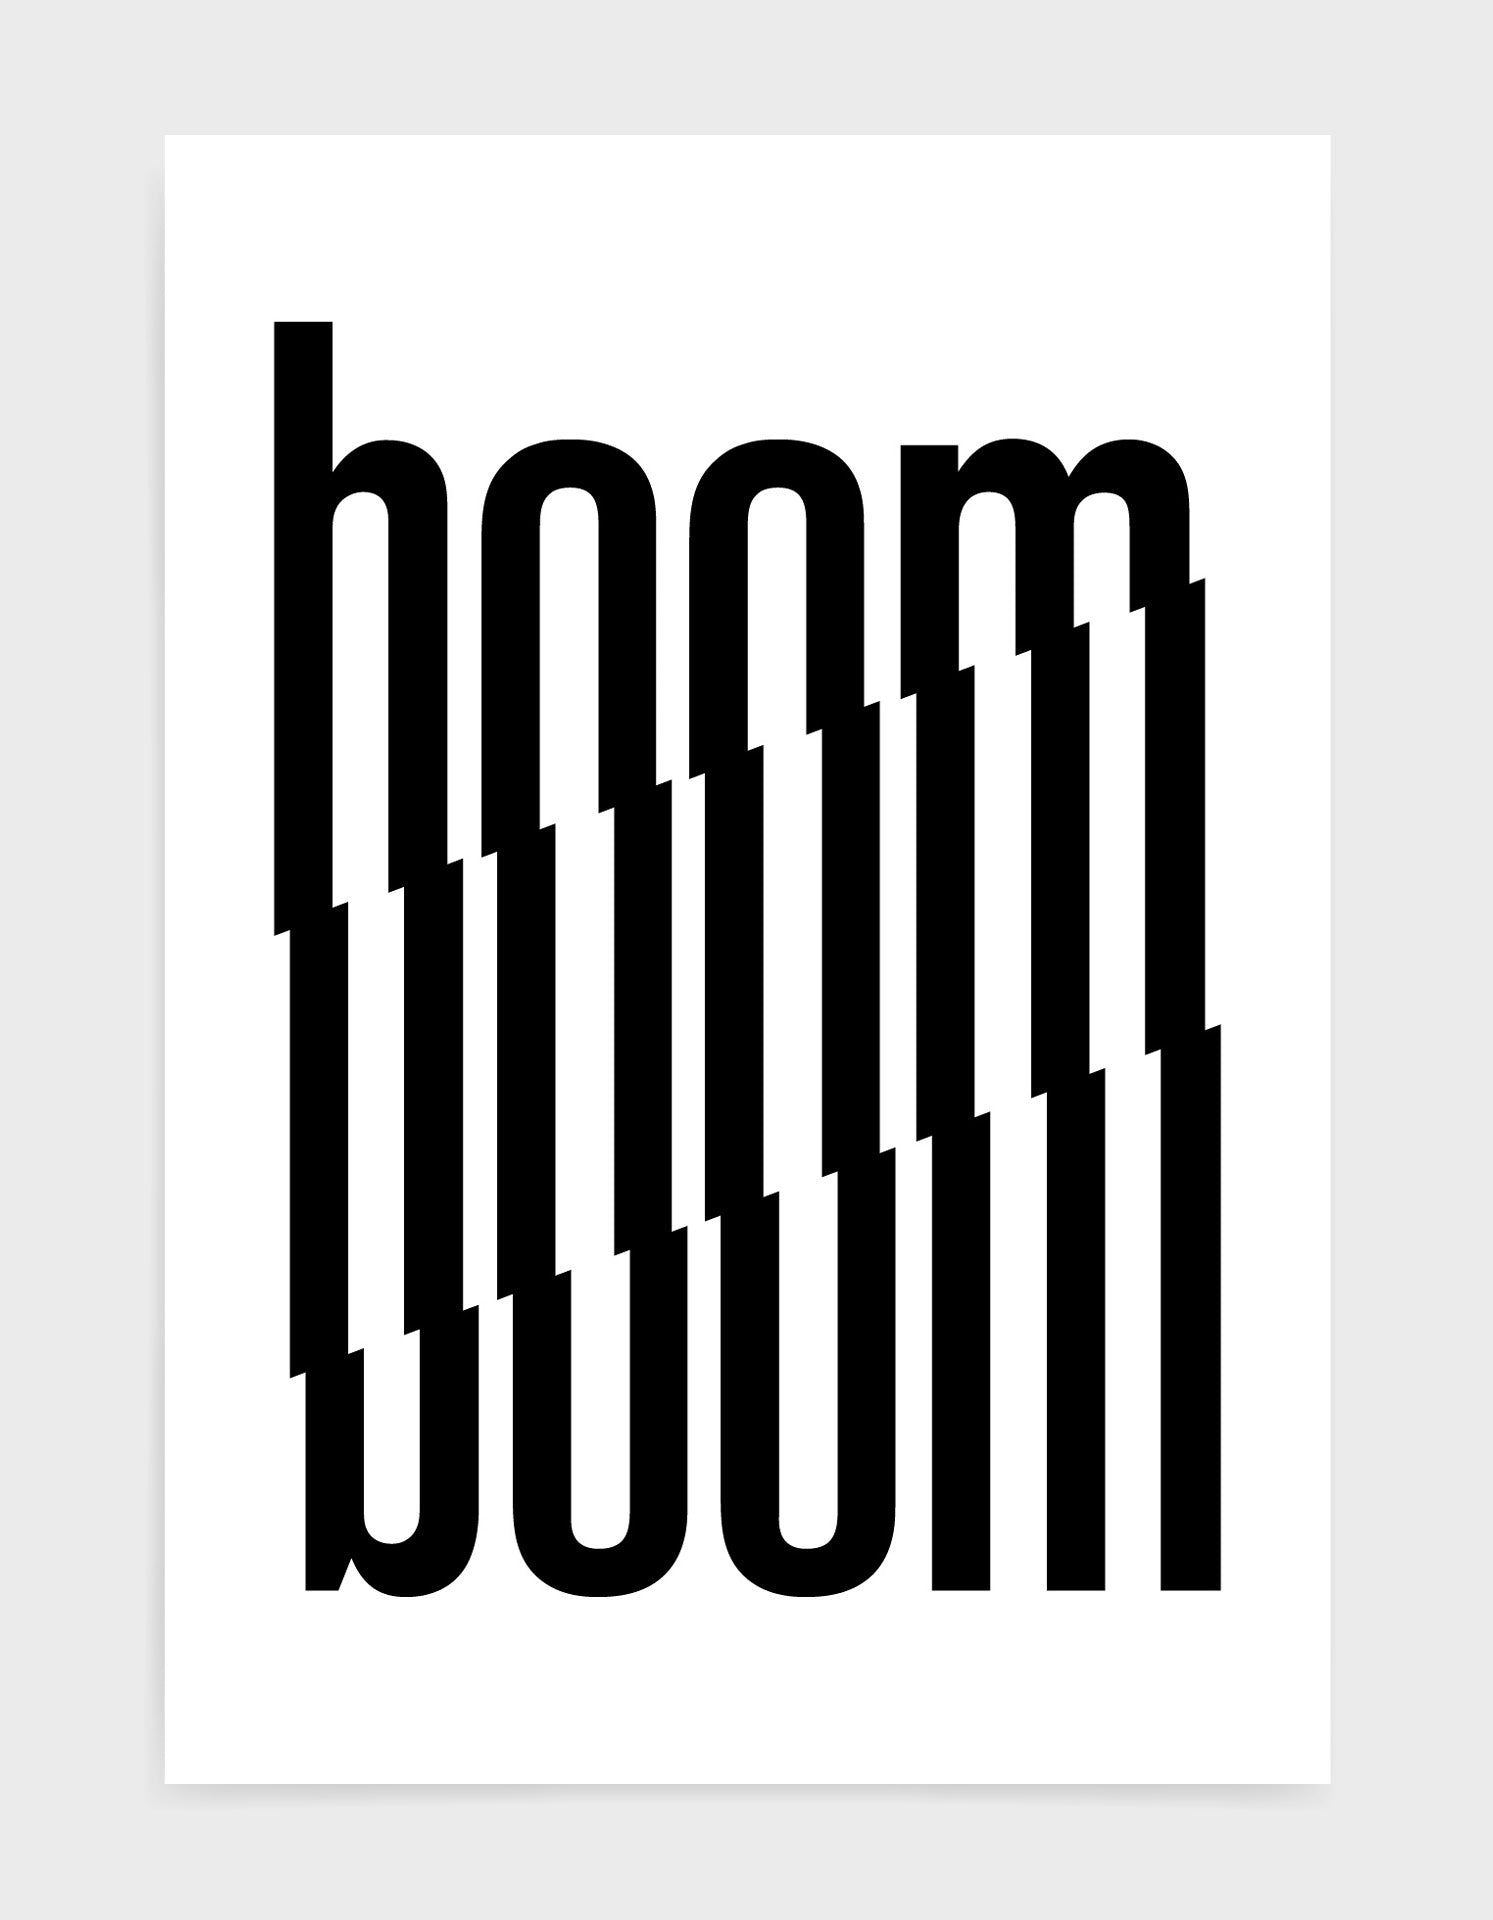 typography art print of the word boom in black text against a white background